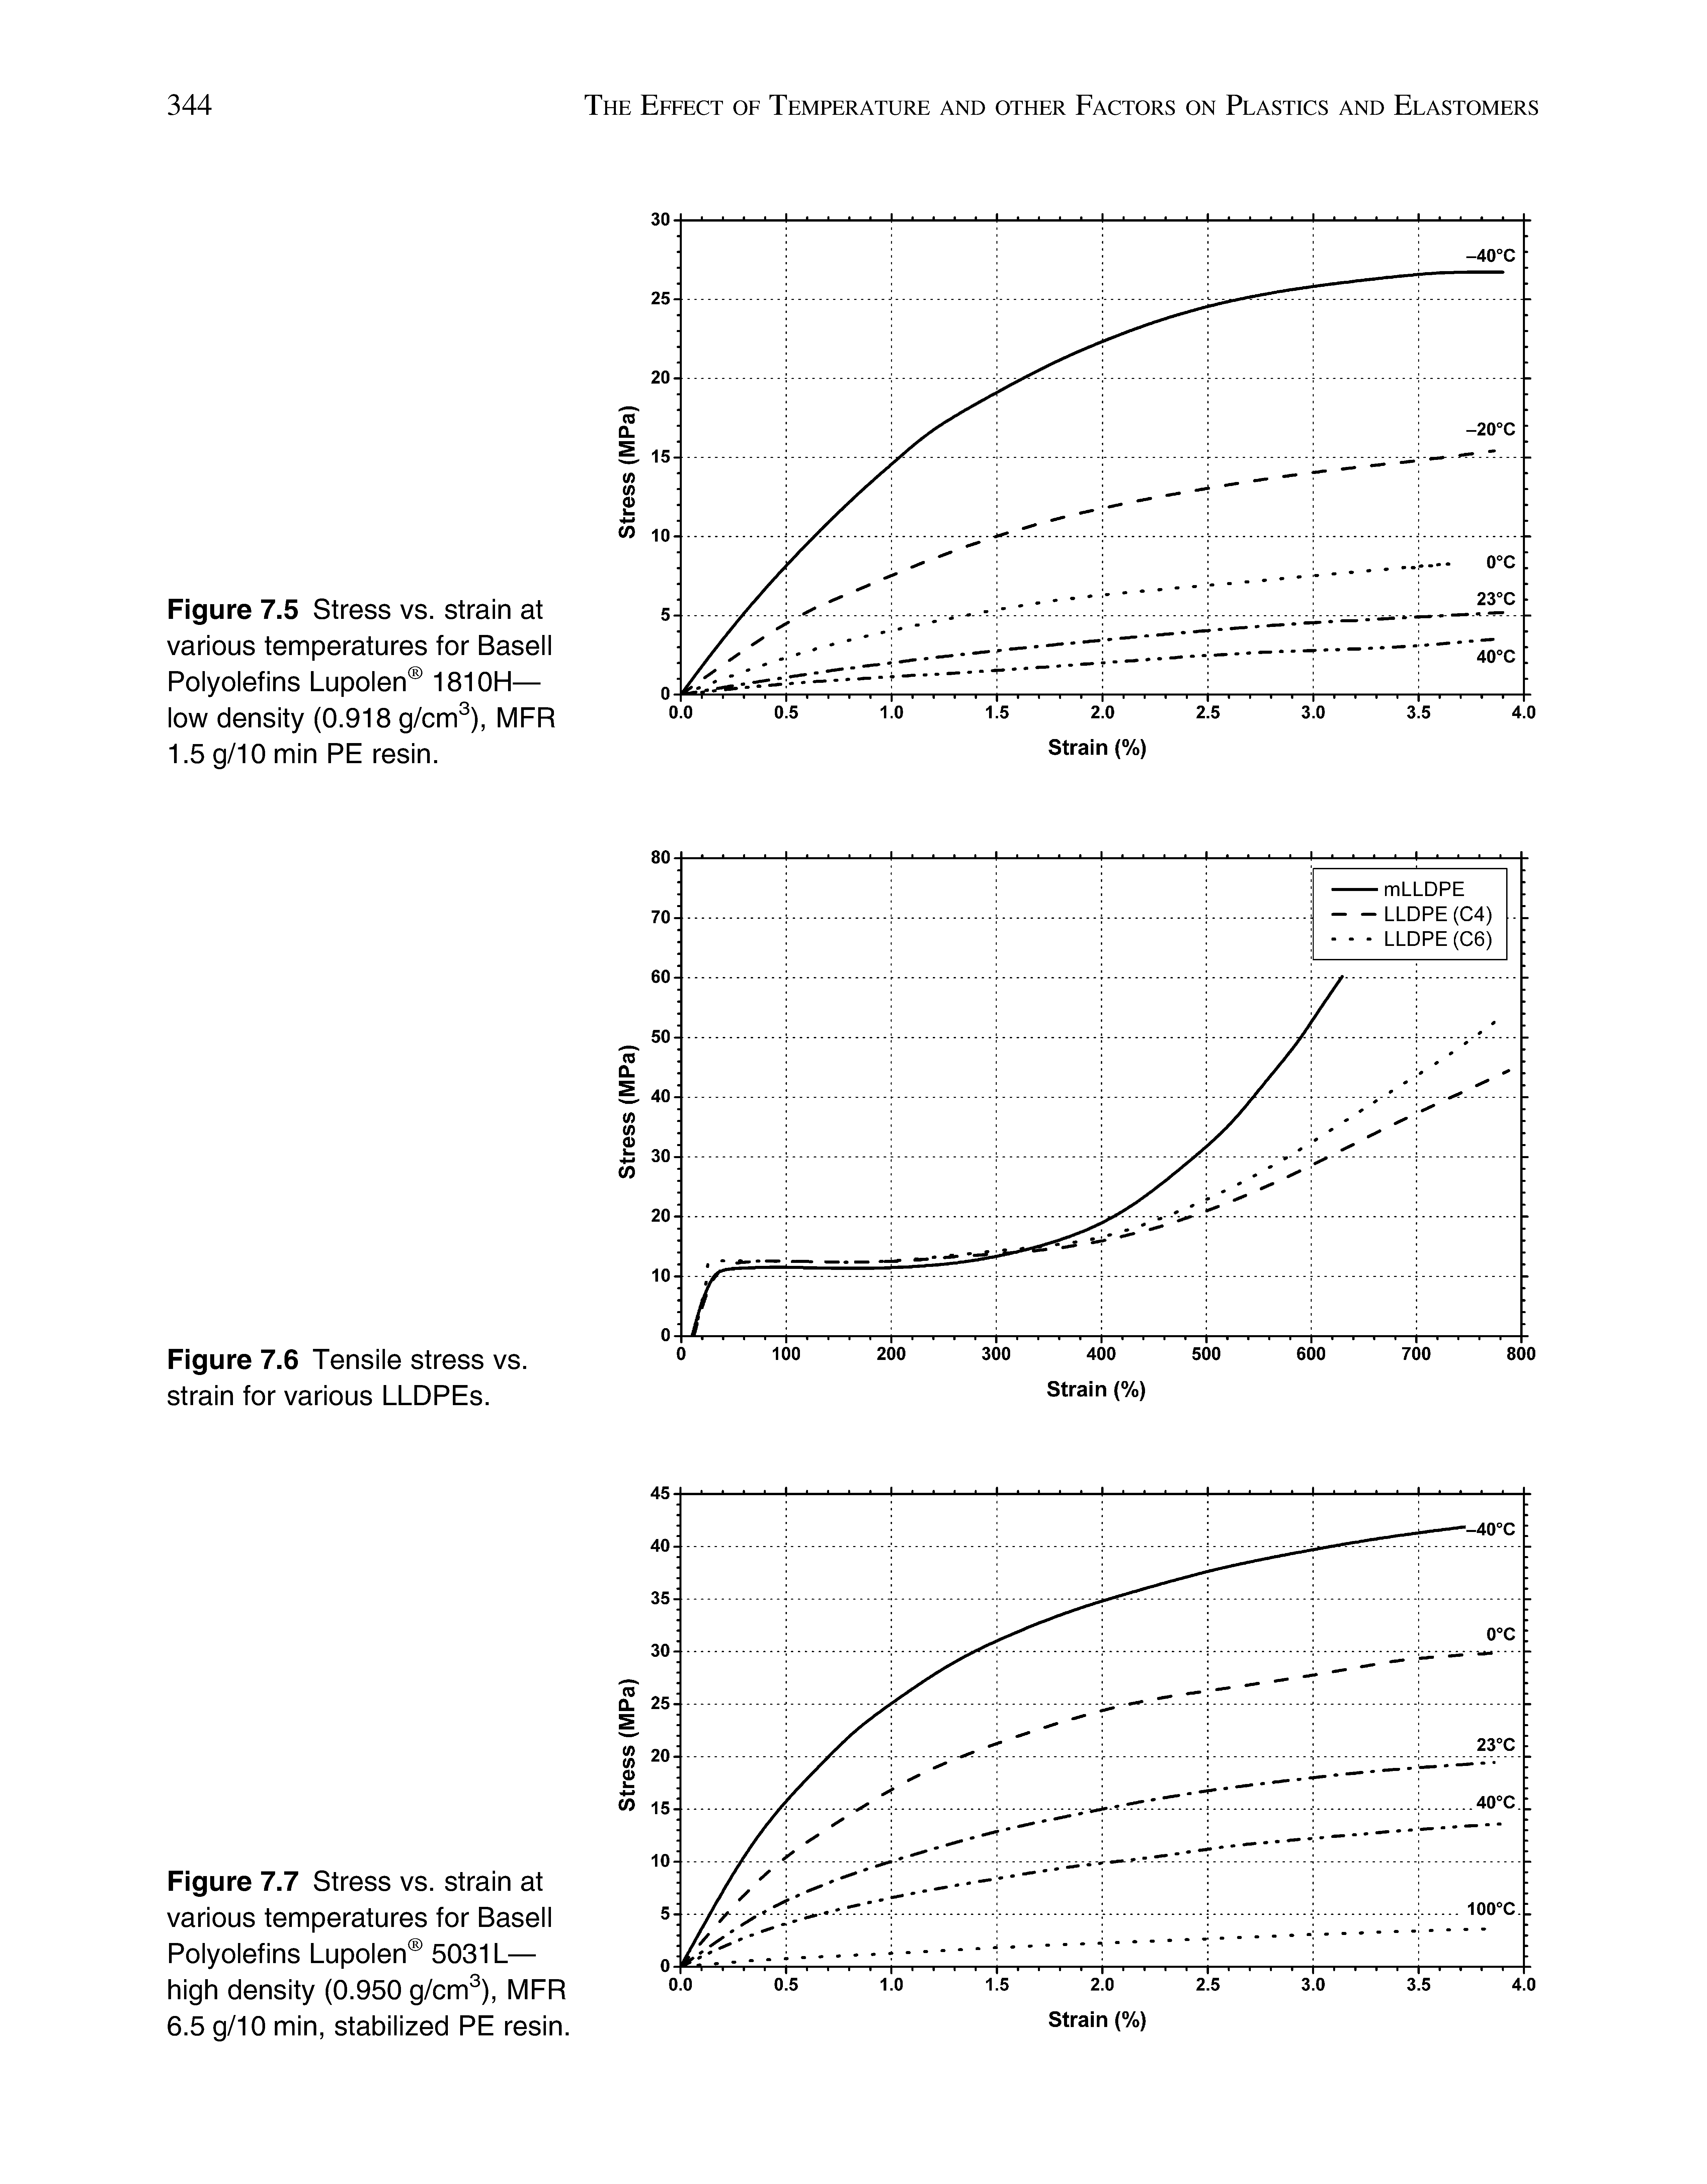 Figure 7.5 Stress vs. strain at various temperatures for Basell Polyolefins Lupolen 181 OH— low density (0.918 g/cm ), MFR 1.5 g/10 min PE resin.